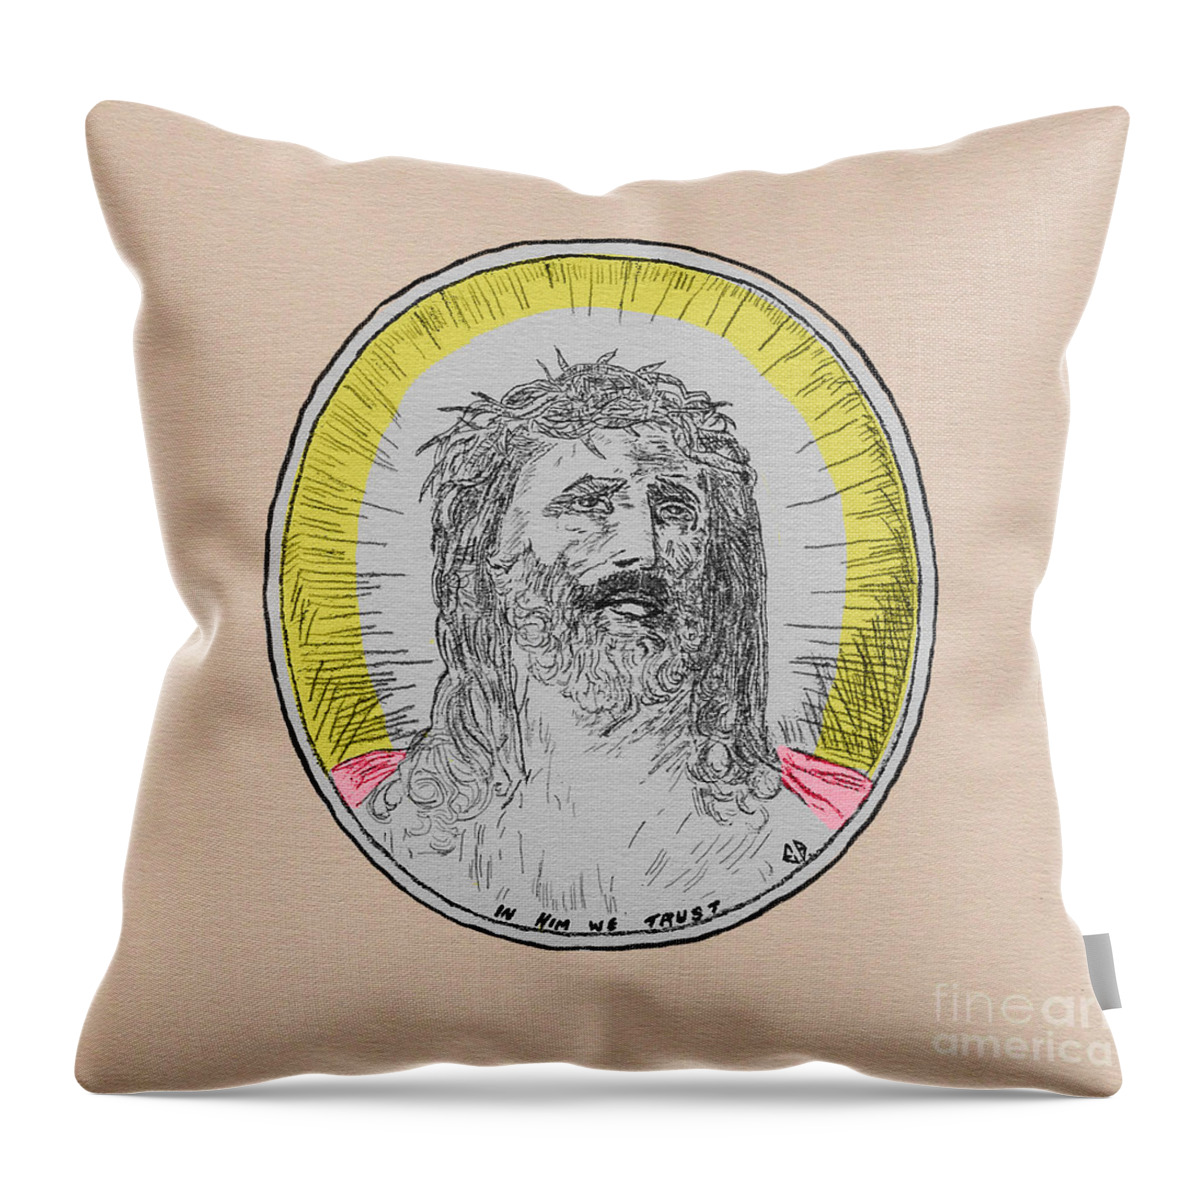 Jesus Throw Pillow featuring the drawing In Him We Trust Colorized by Donna L Munro